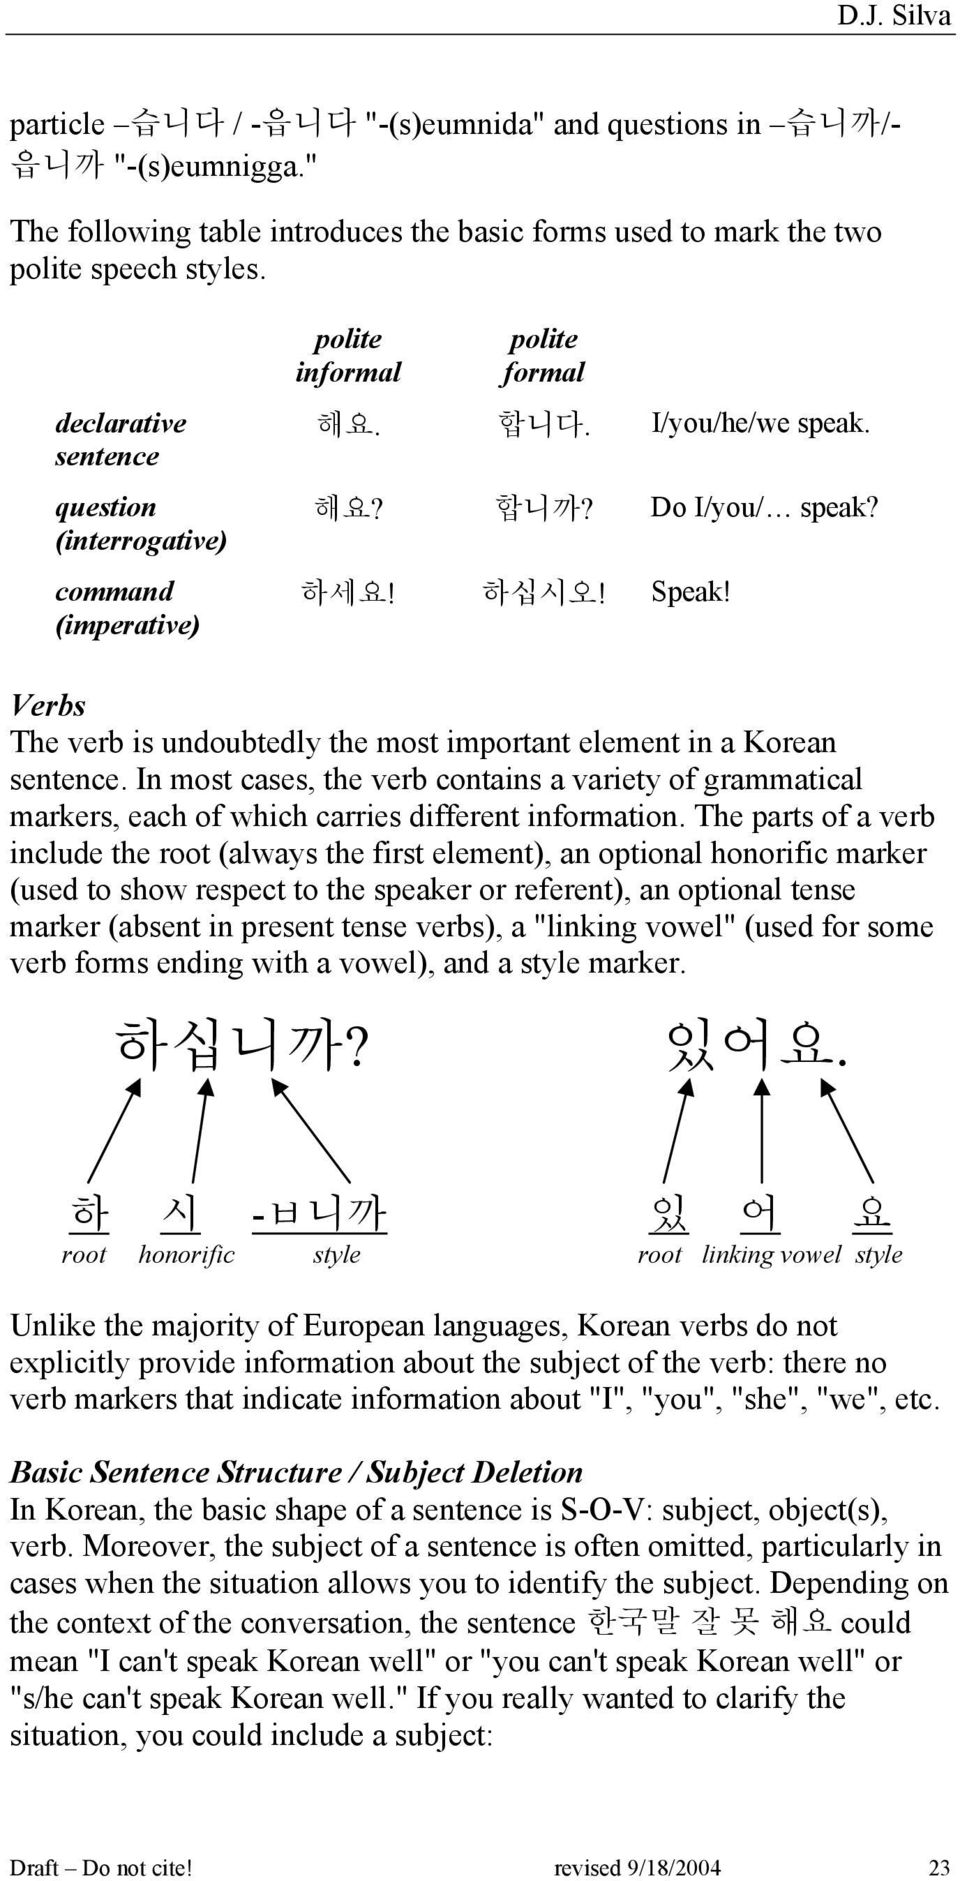 Verbs The verb is undoubtedly the most important element in a Korean sentence. In most cases, the verb contains a variety of grammatical markers, each of which carries different information.